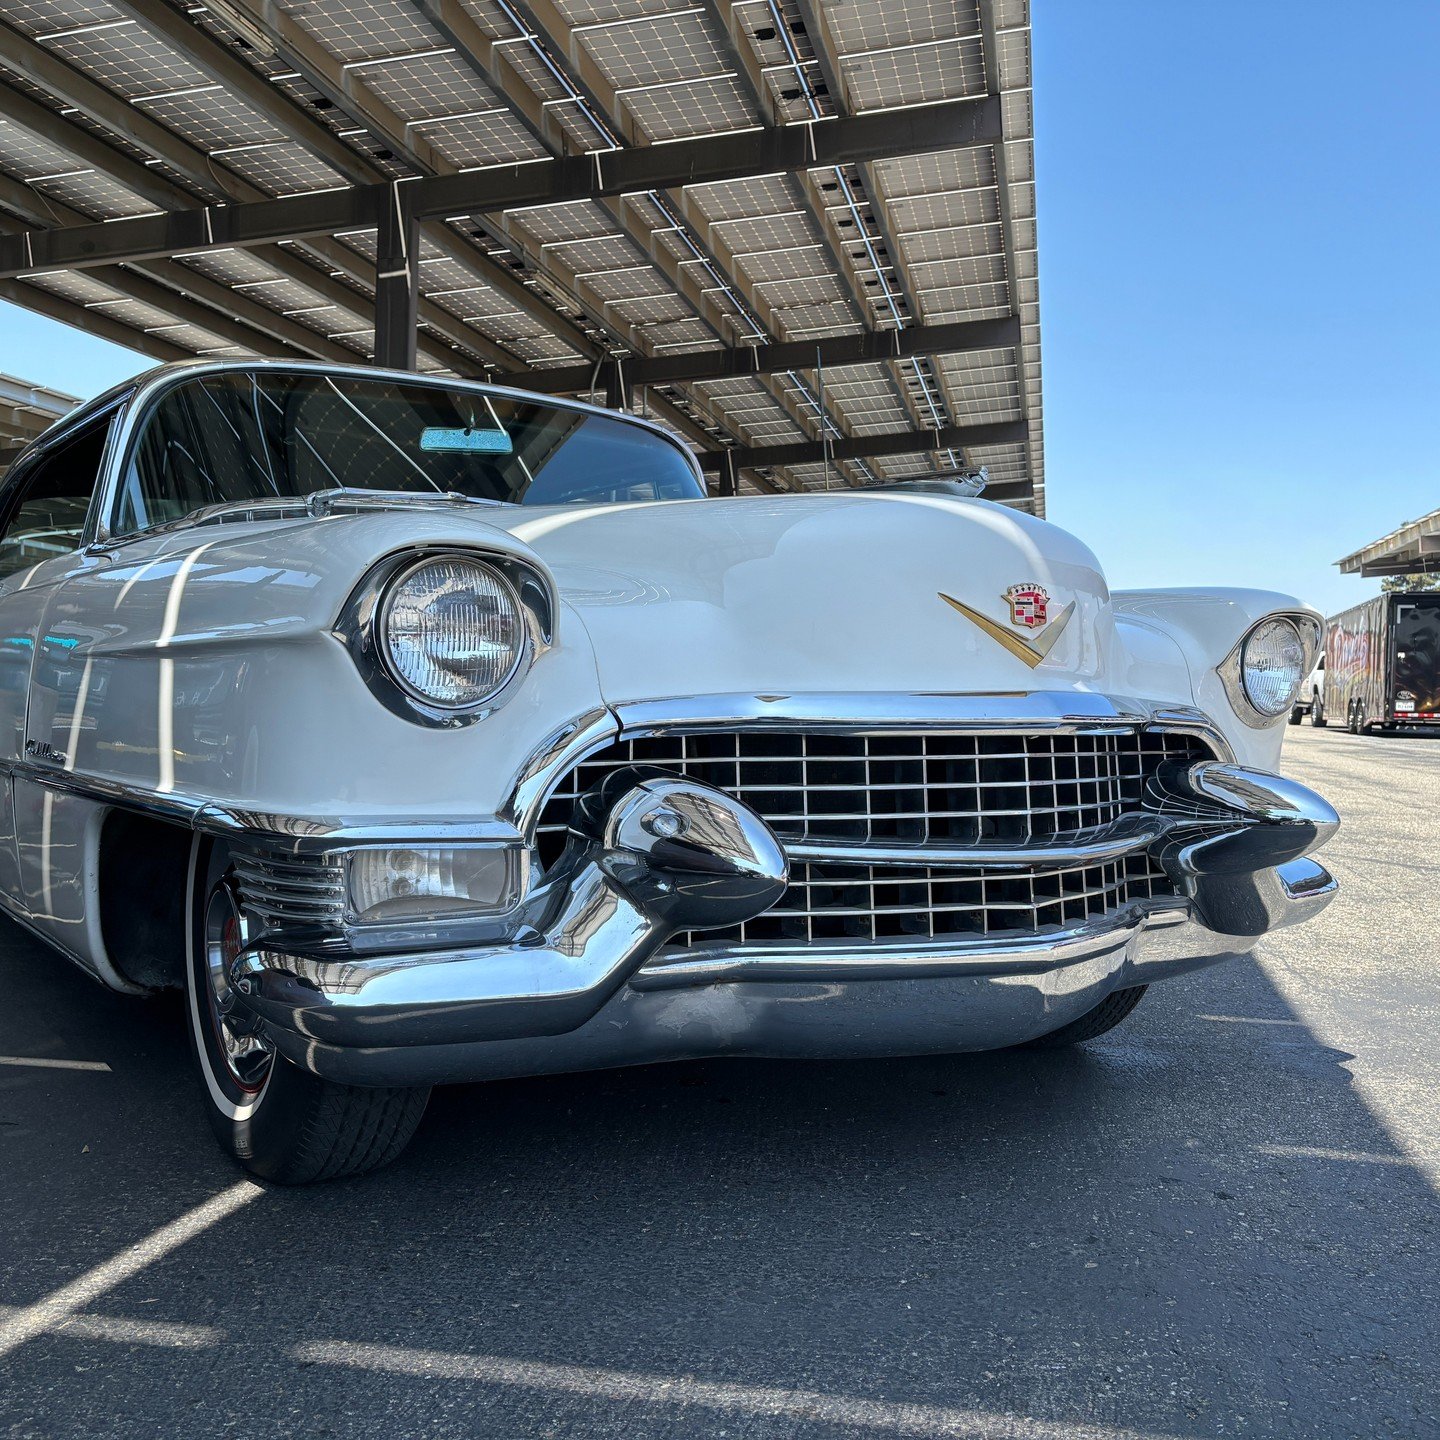 Thank You for Supporting the Car Show.

We raised a huge amount for the Scholarship Fund. Special thanks to our entire volunteer team led by Mr. Weber, club members, students, sponsors, vendors, Rubidoux High School Alumni, Dead Sleds Car Club, Old F